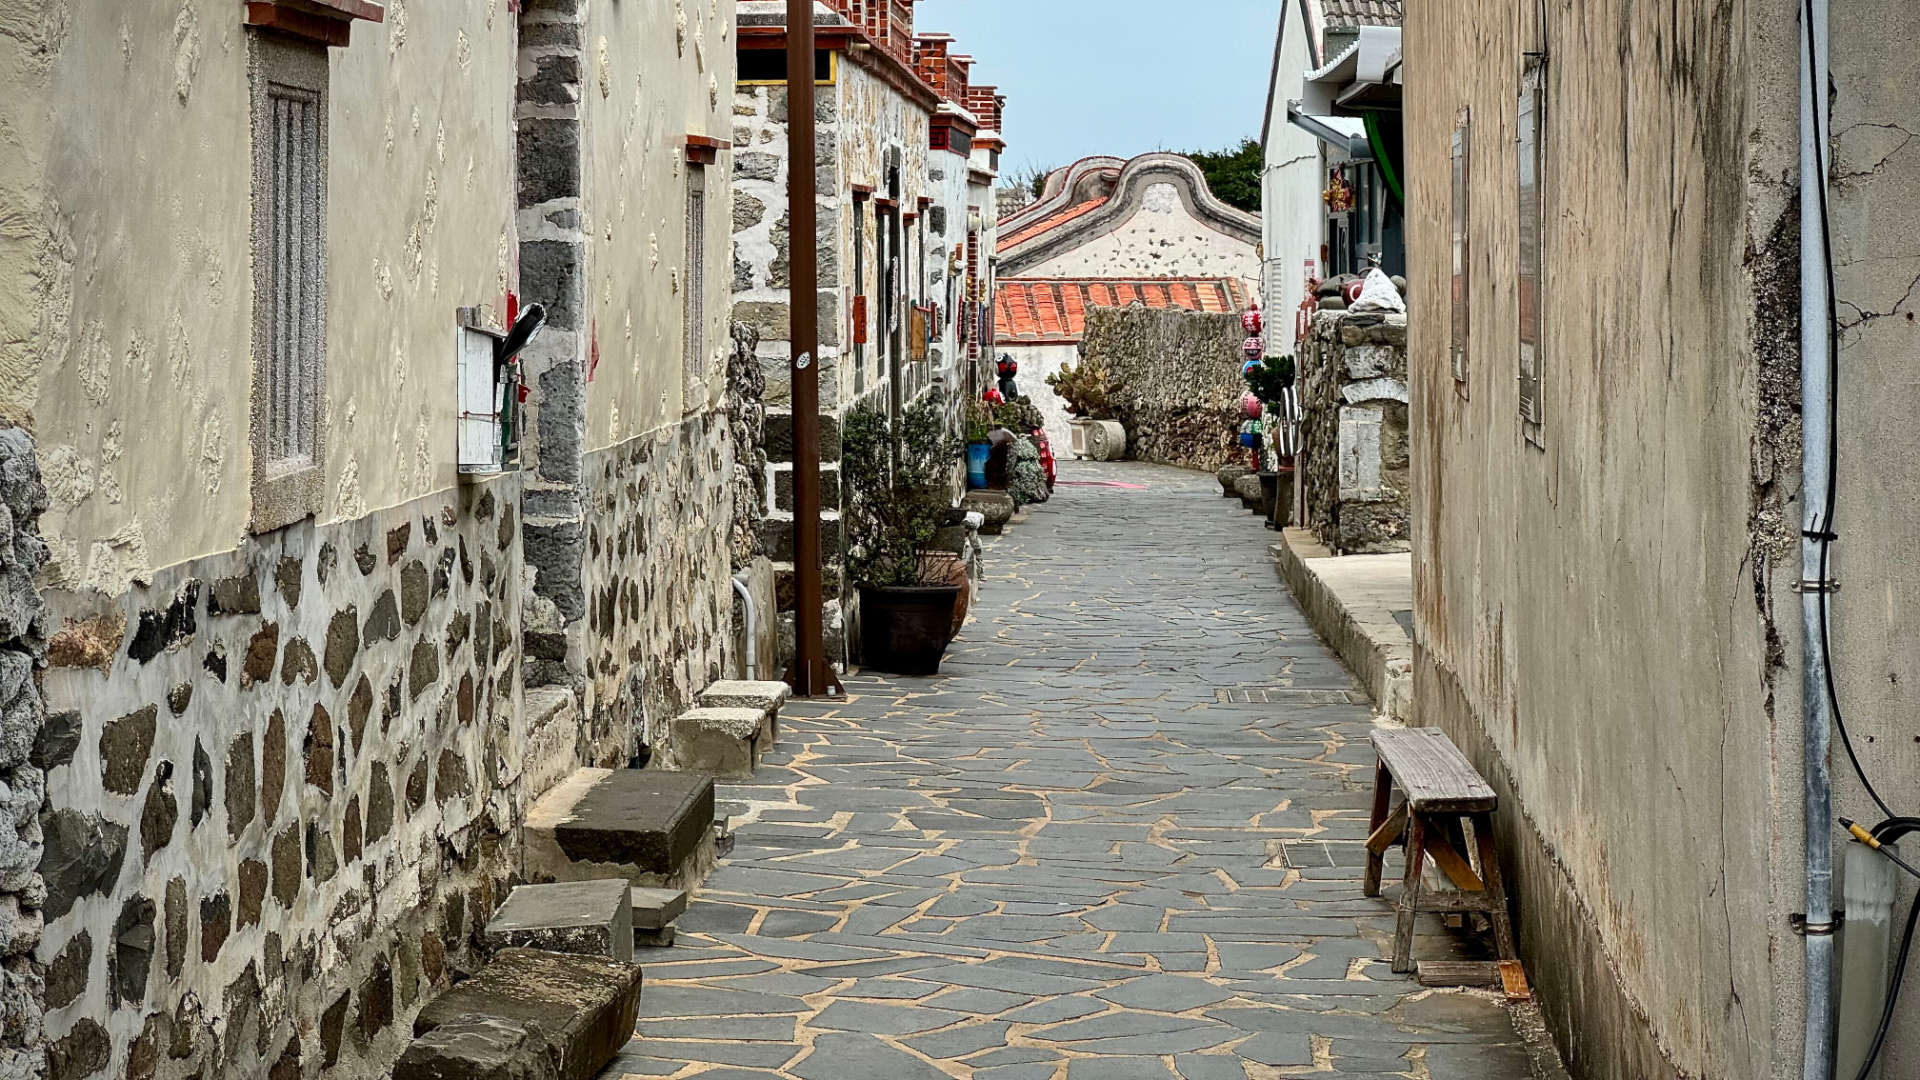 An alleyway in Erkan Historic Village. There are historic stone buildings on either side.